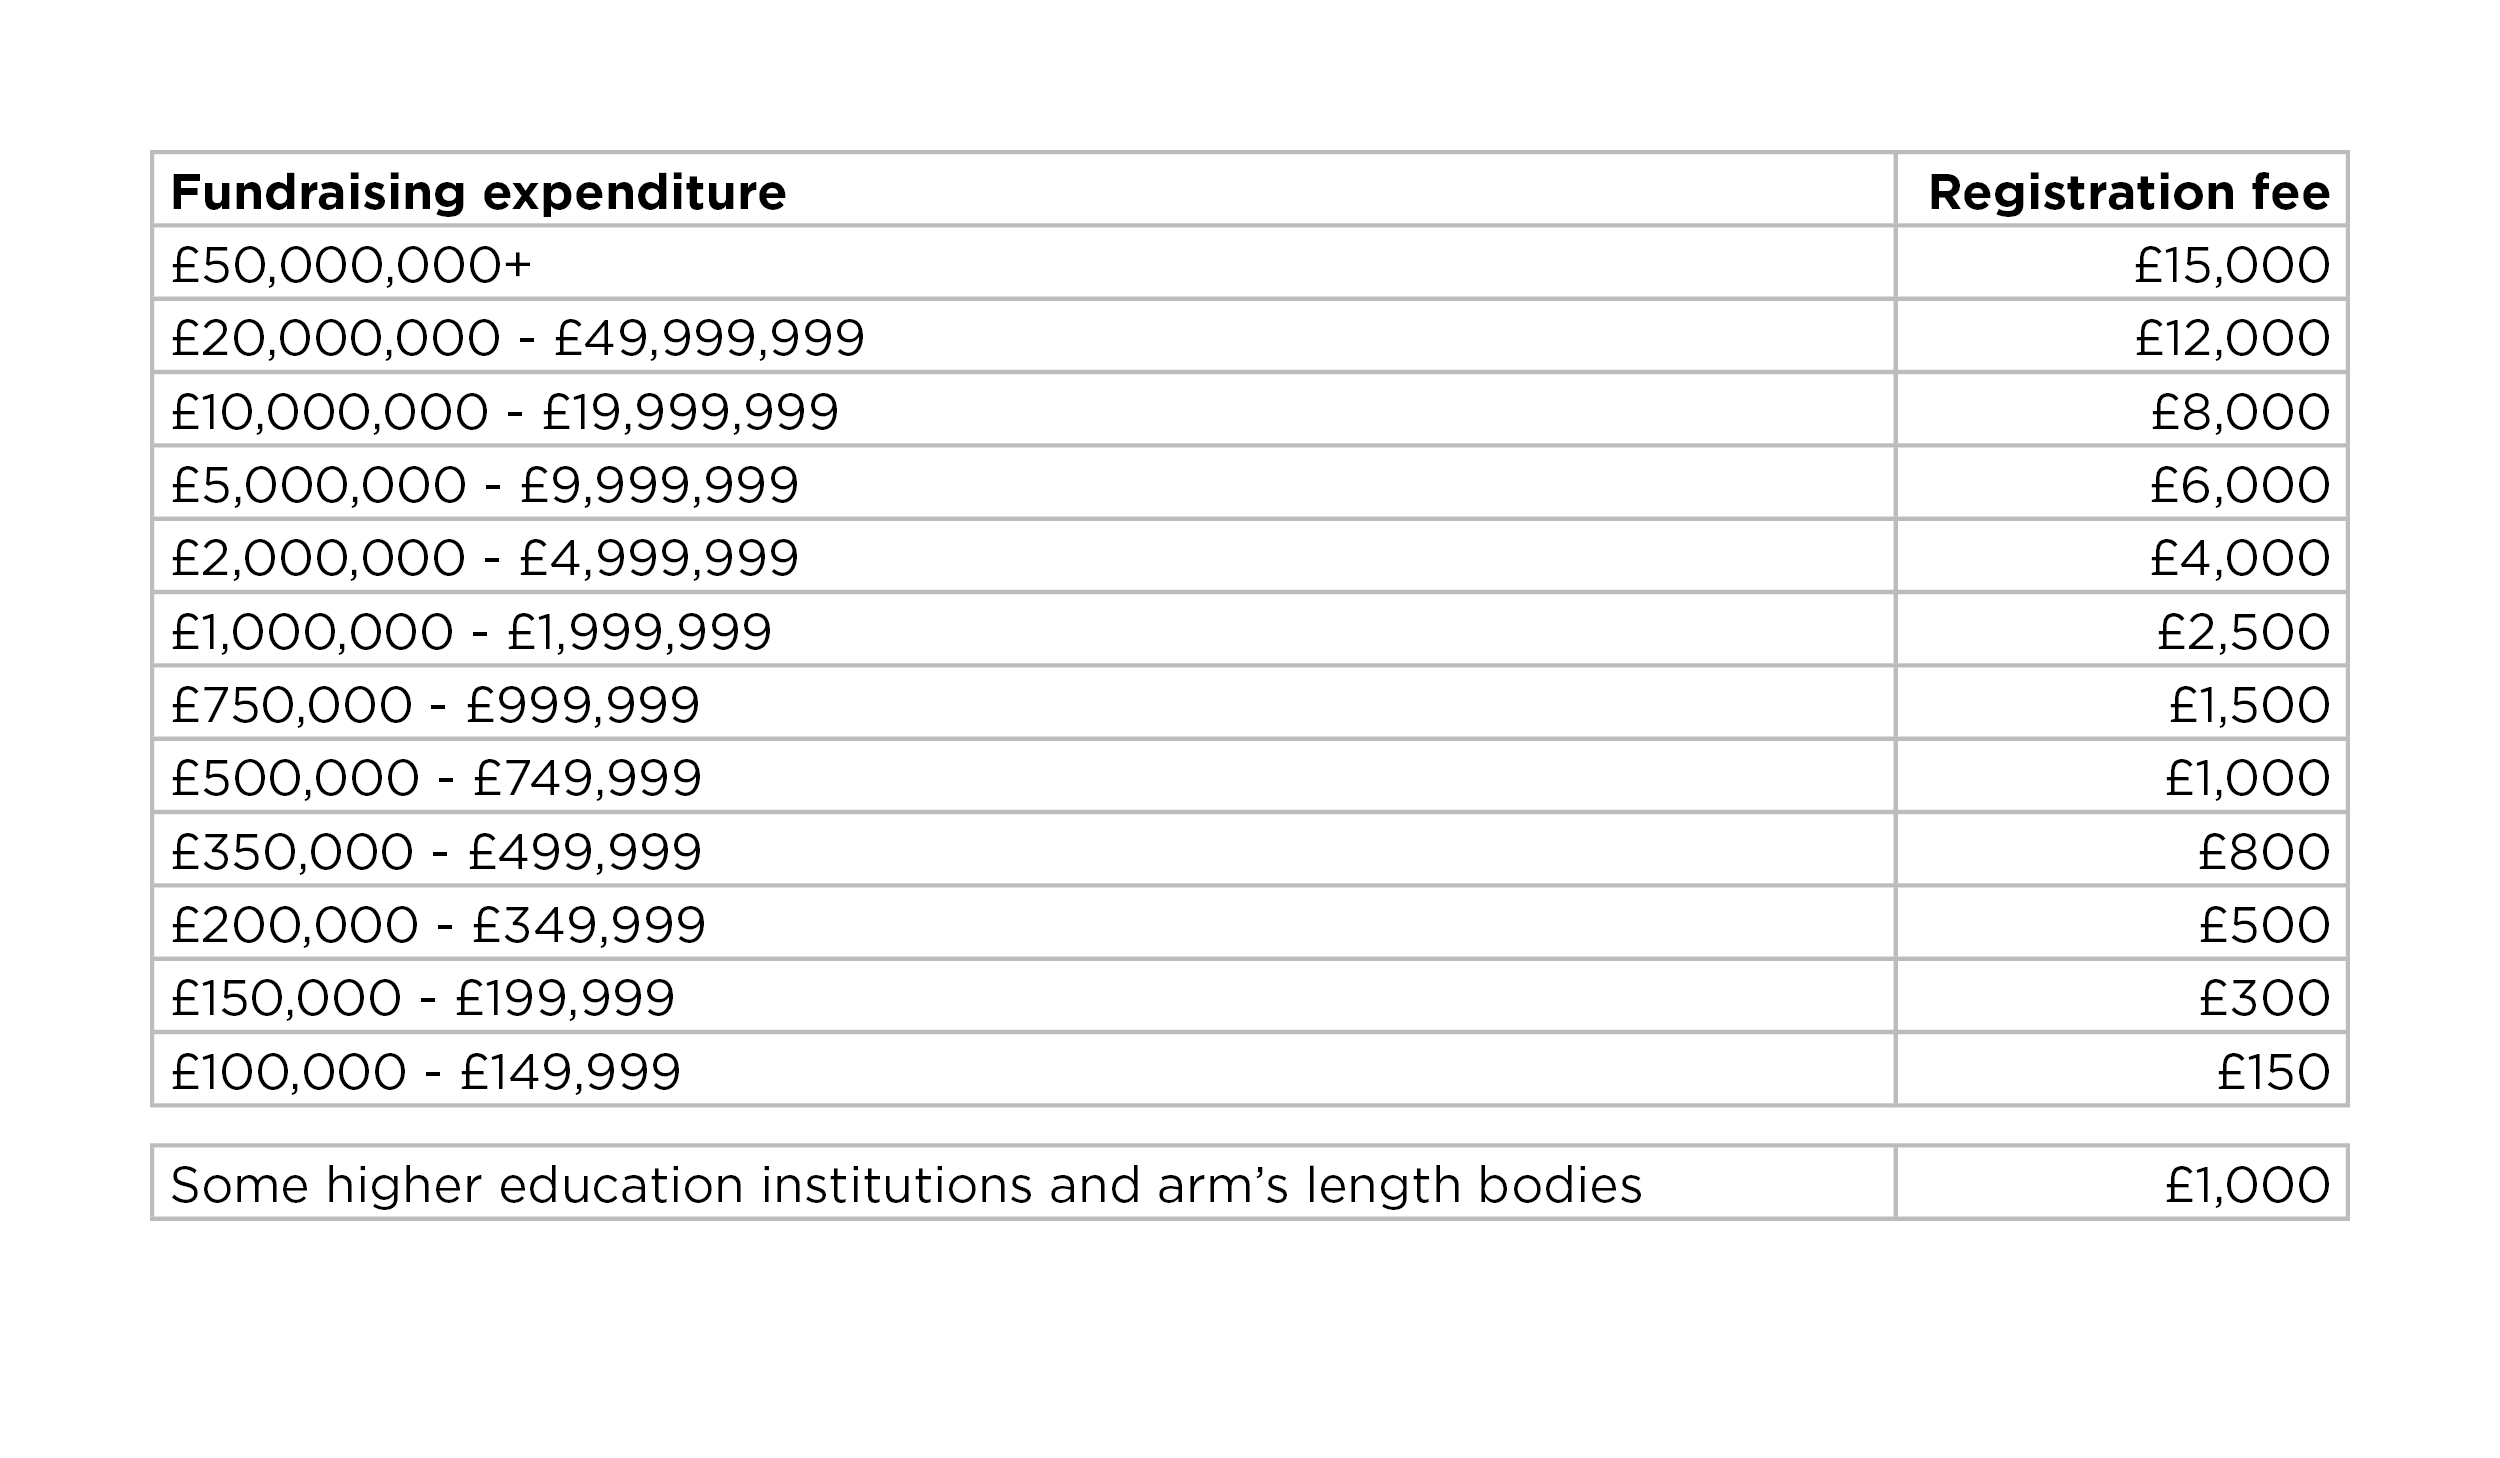 Table showing levy fee bands